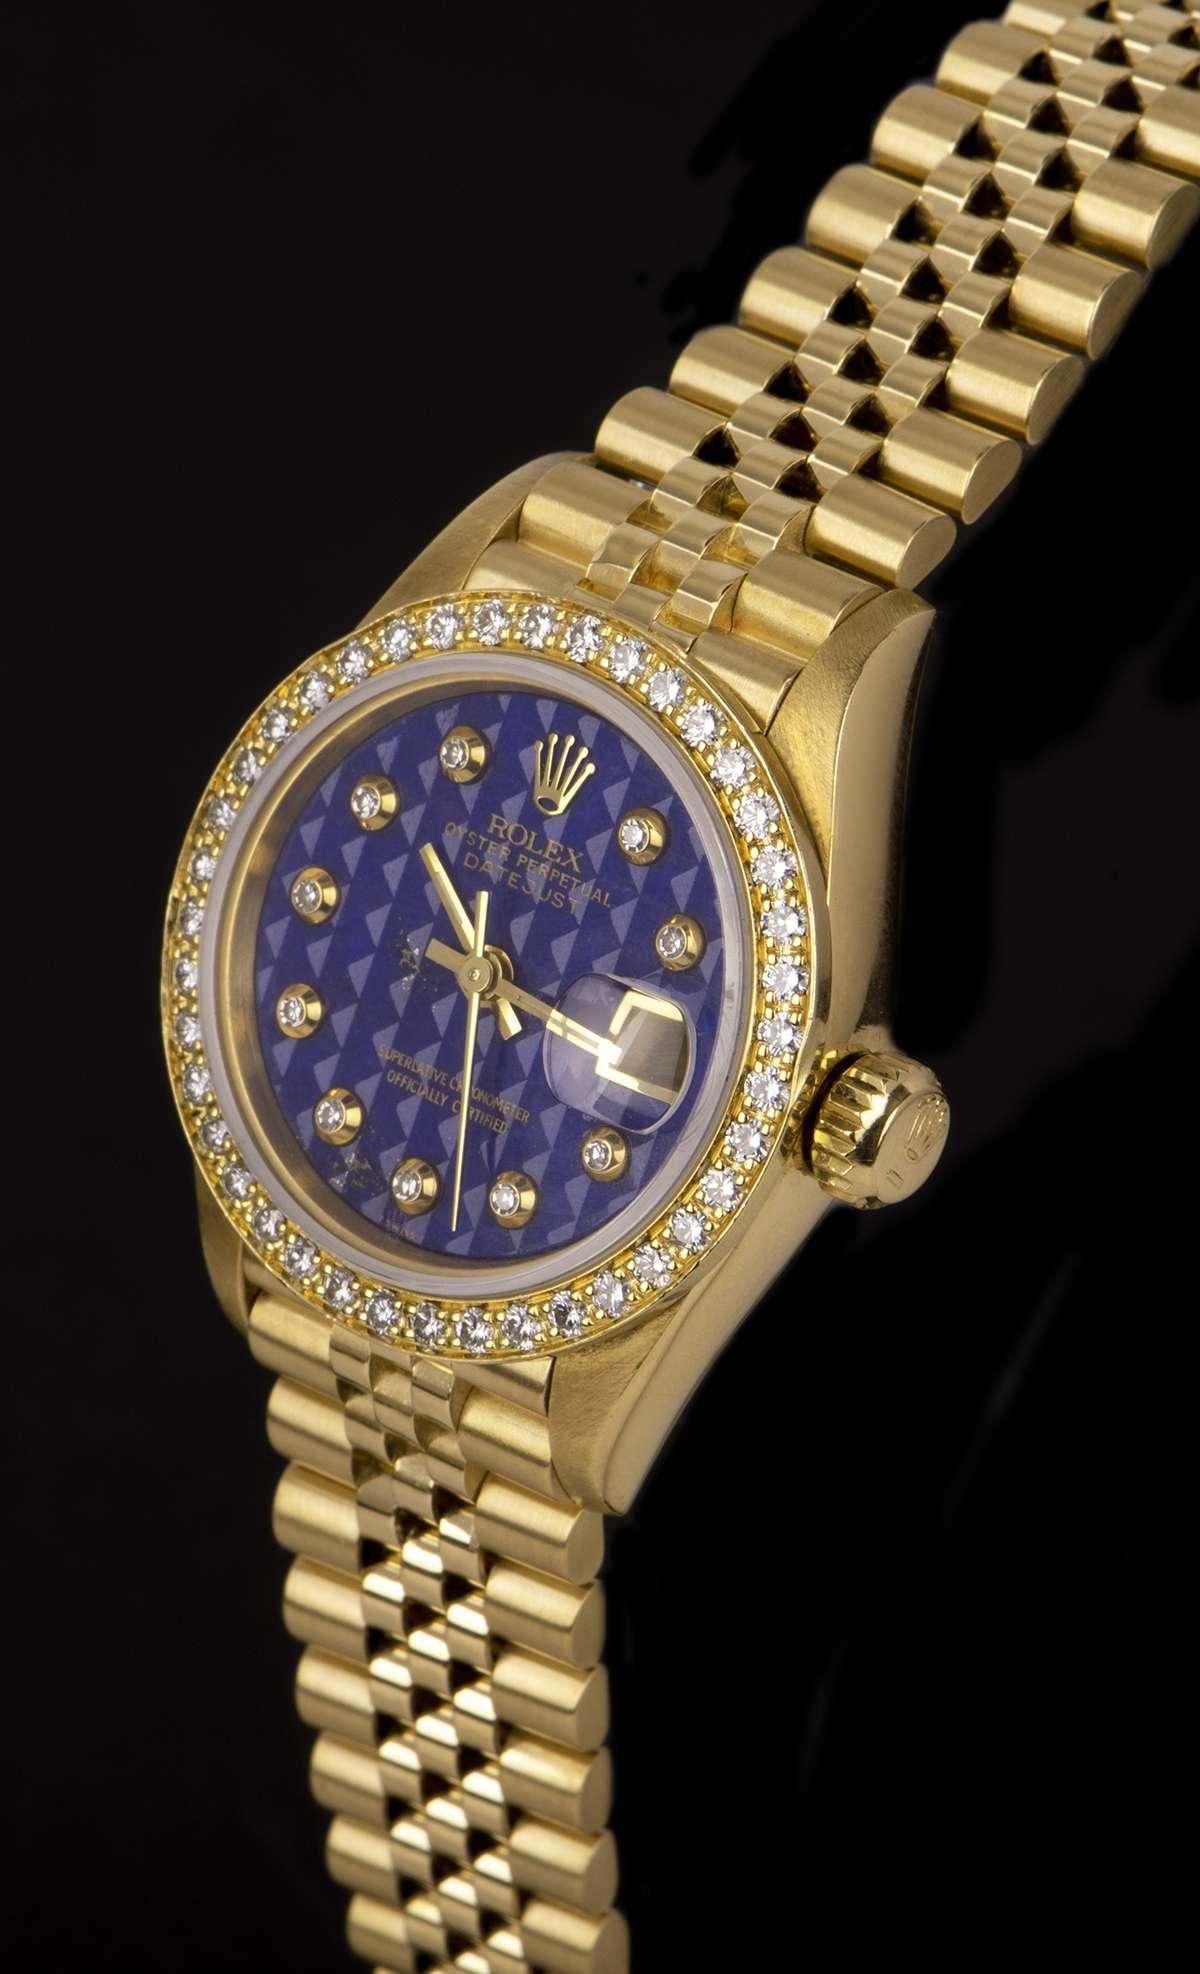 An 18k Yellow Gold Oyster Perpetual Datejust Ladies Wristwatch, rare lapis lazuli pyramid dial with 10 applied rubover set diamonds, date at 3 0'clock, a fixed 18k yellow gold bezel set with approximately 40 round brilliant cut diamonds (~0.4ct), an